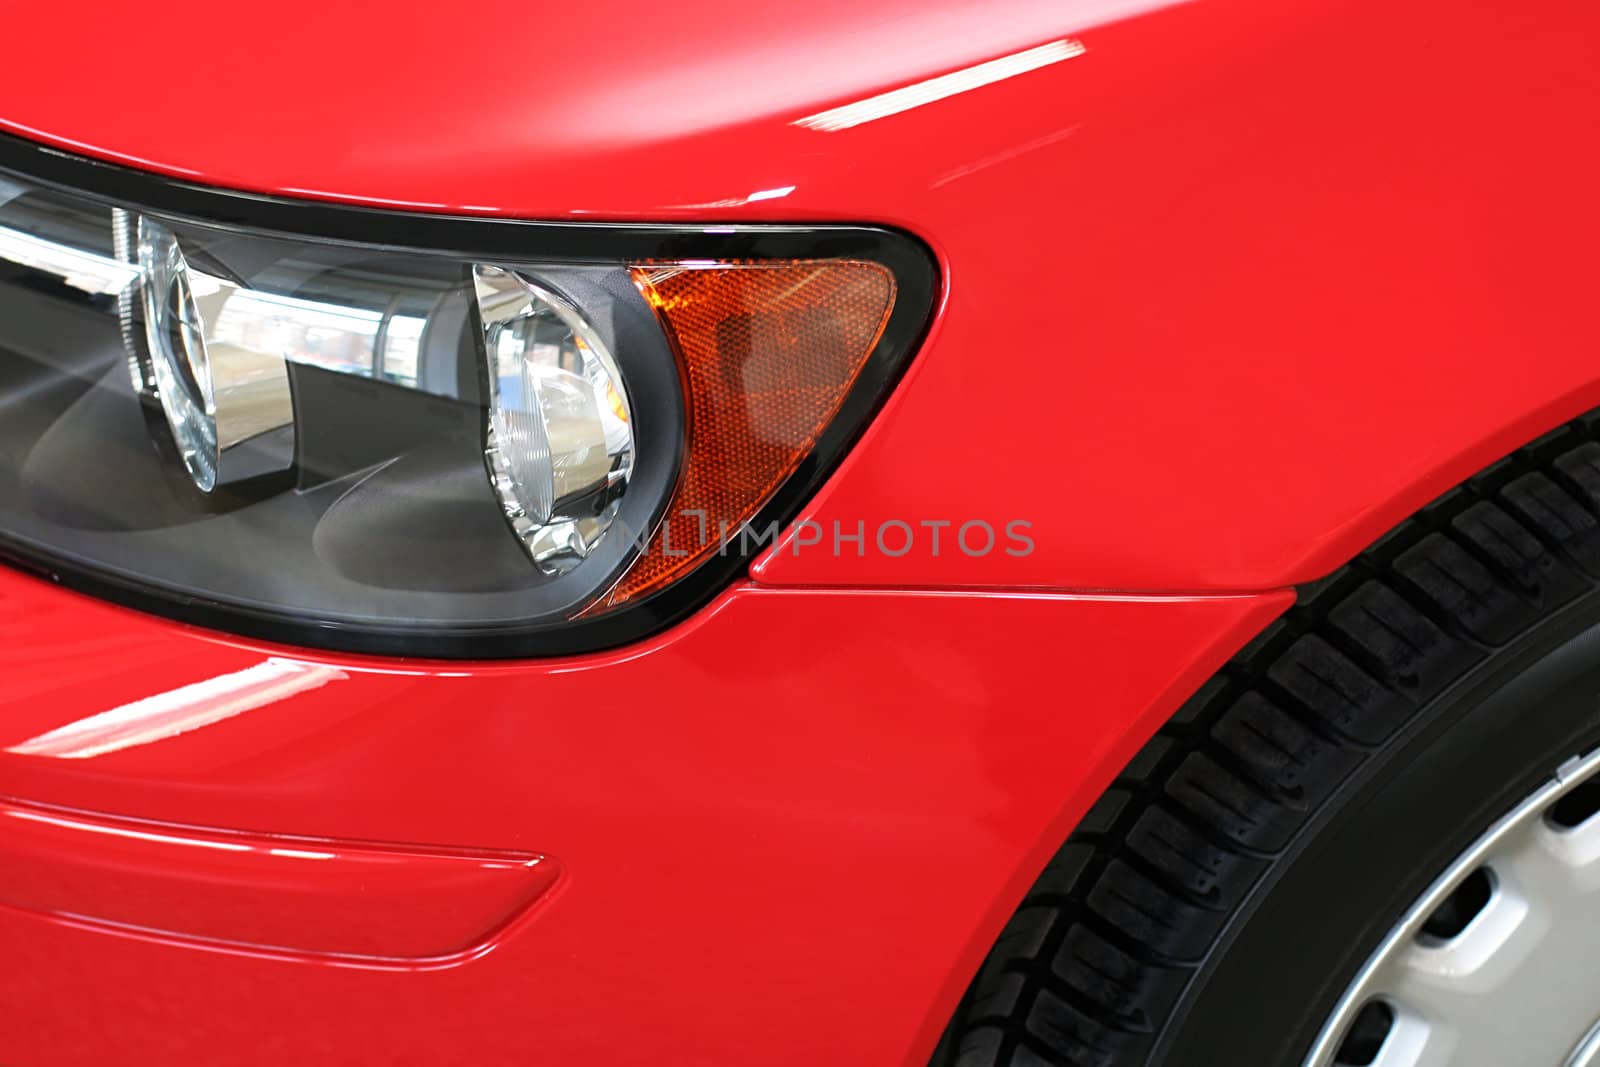 Beautiful headlight of the red sports car